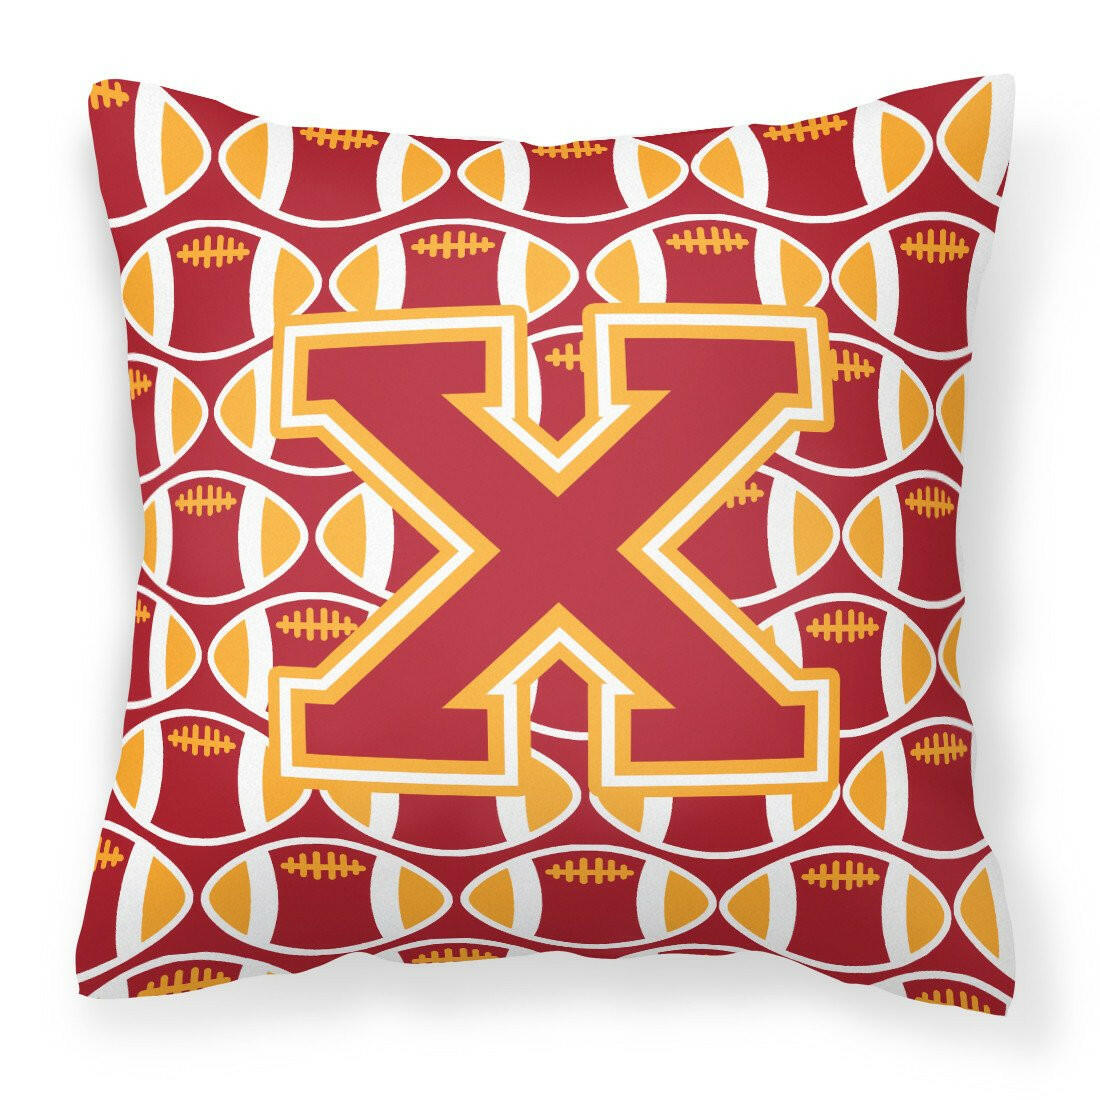 Letter X Football Cardinal and Gold Fabric Decorative Pillow CJ1070-XPW1414 by Caroline's Treasures